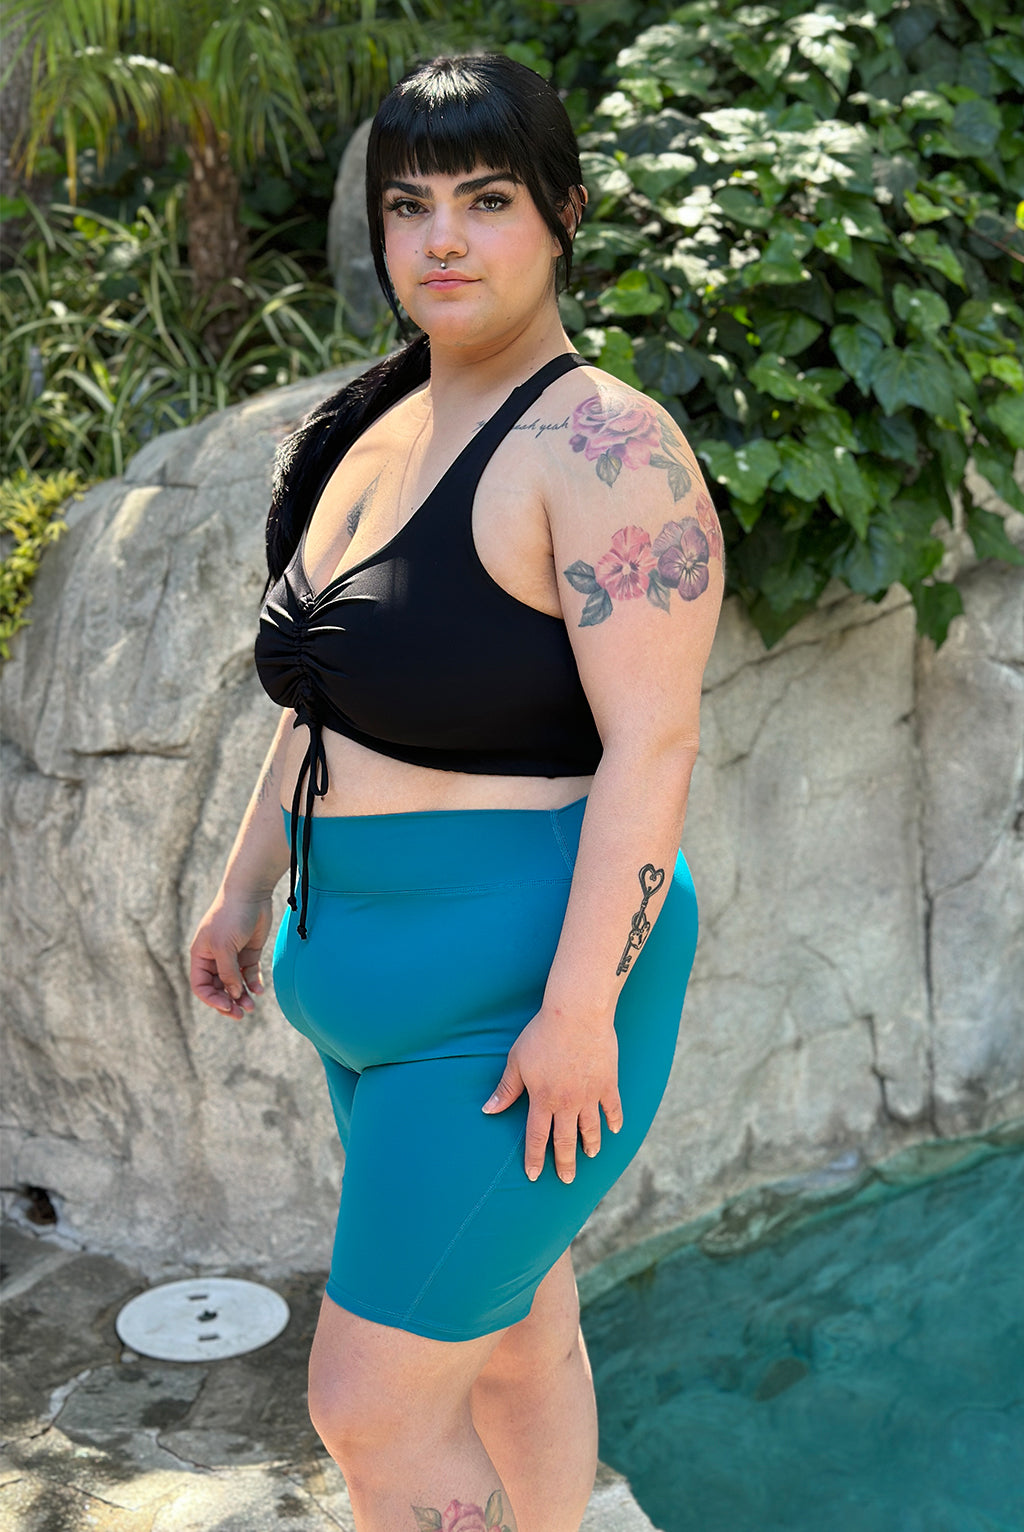 Black-haired model poses by pool and ivy wearing plus size 9 inch swim shorts in teal color